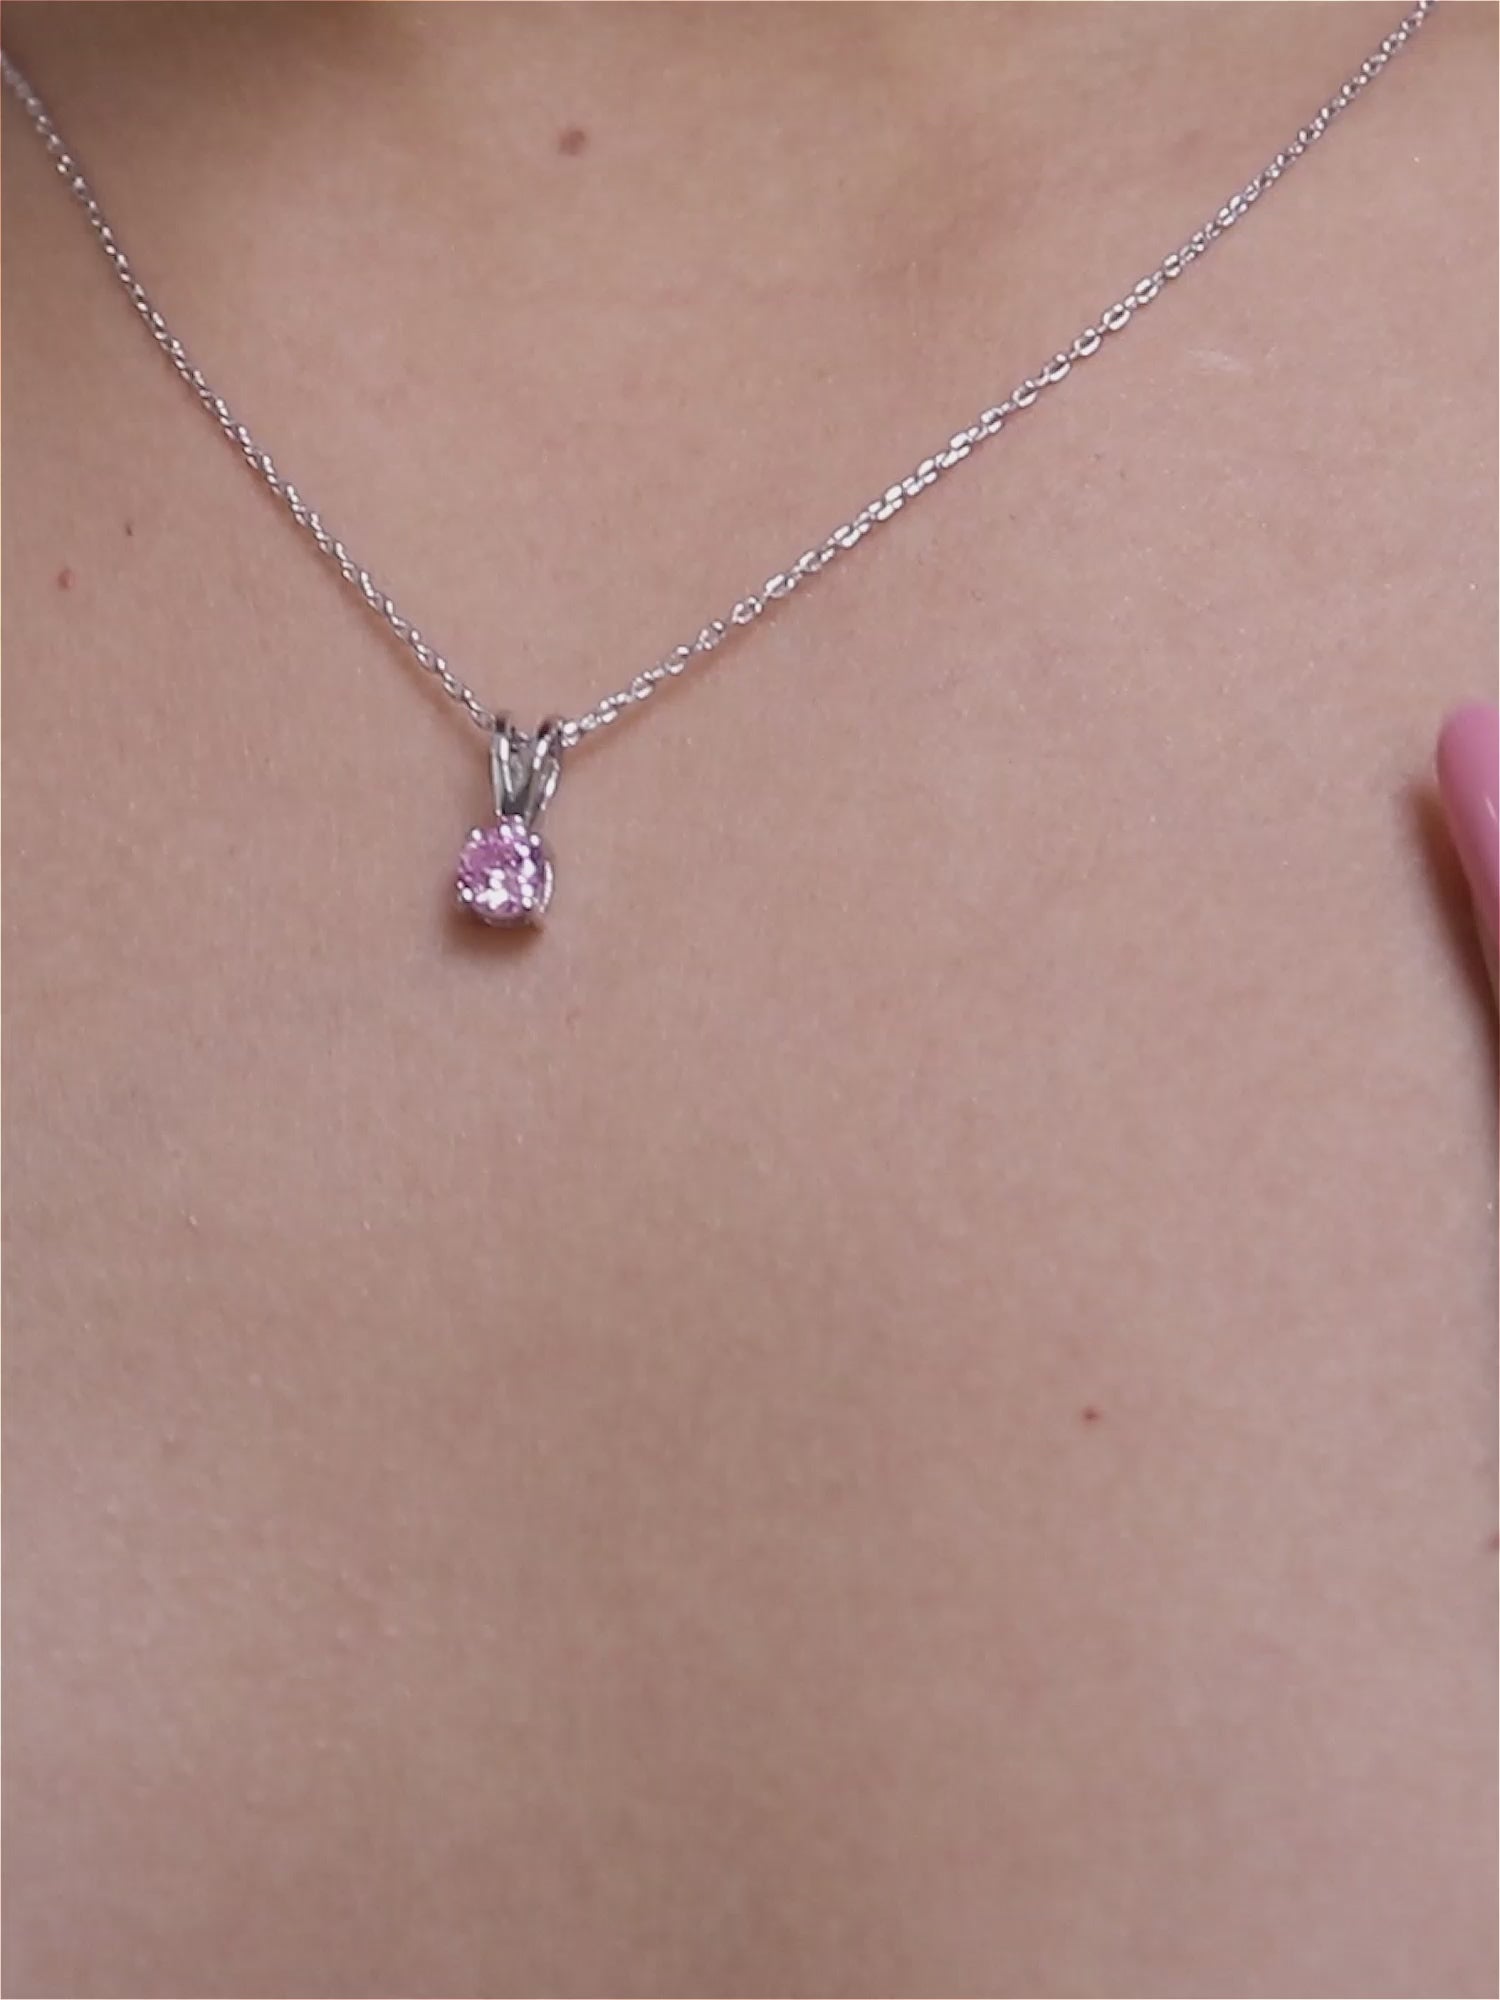 PINK STONE NECKLACE IN PURE 925 STERLING SILVER FOR WOMEN